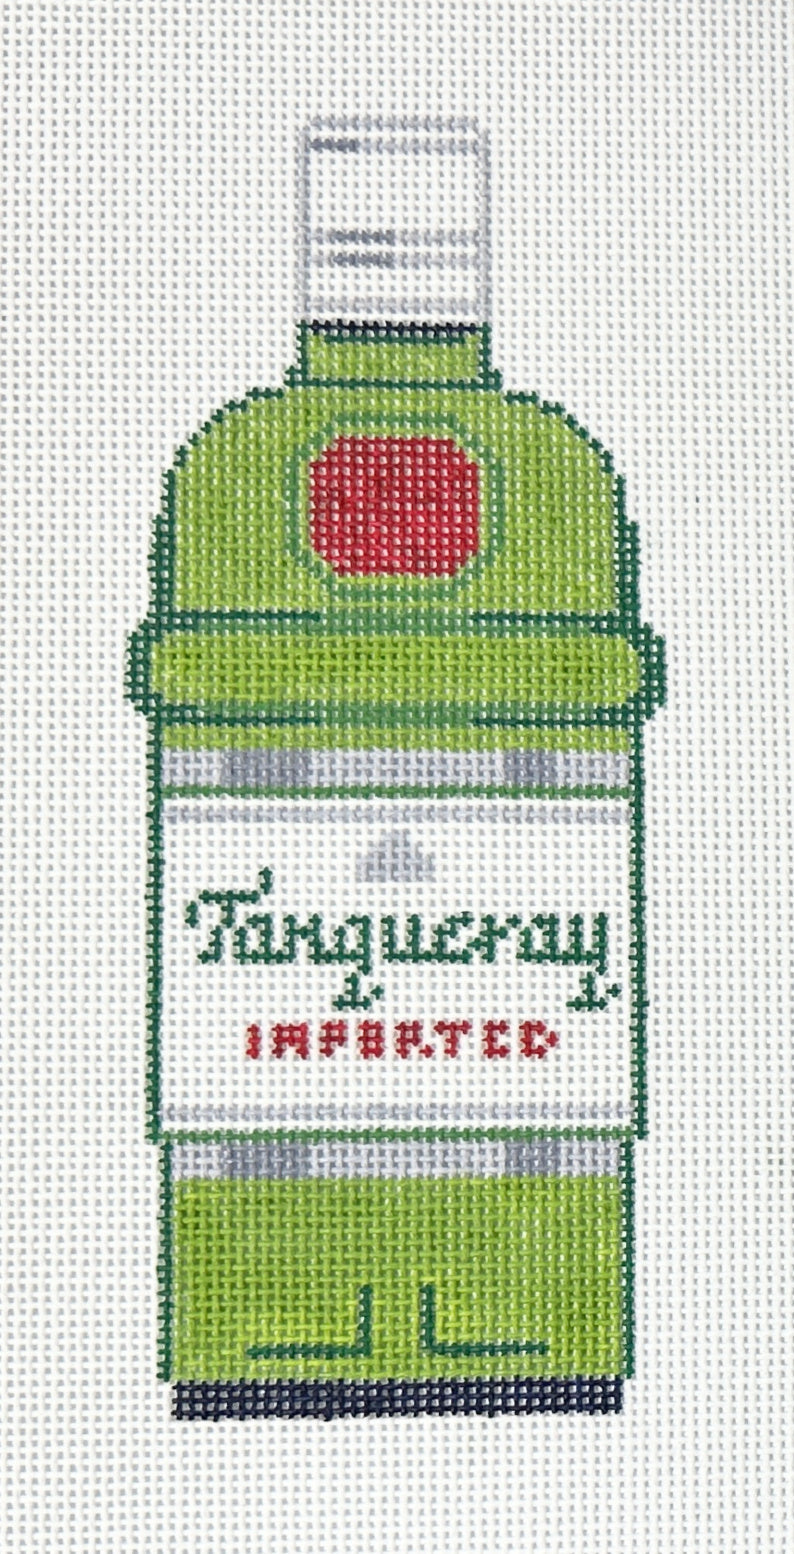 Tanqueray Gin Bottle